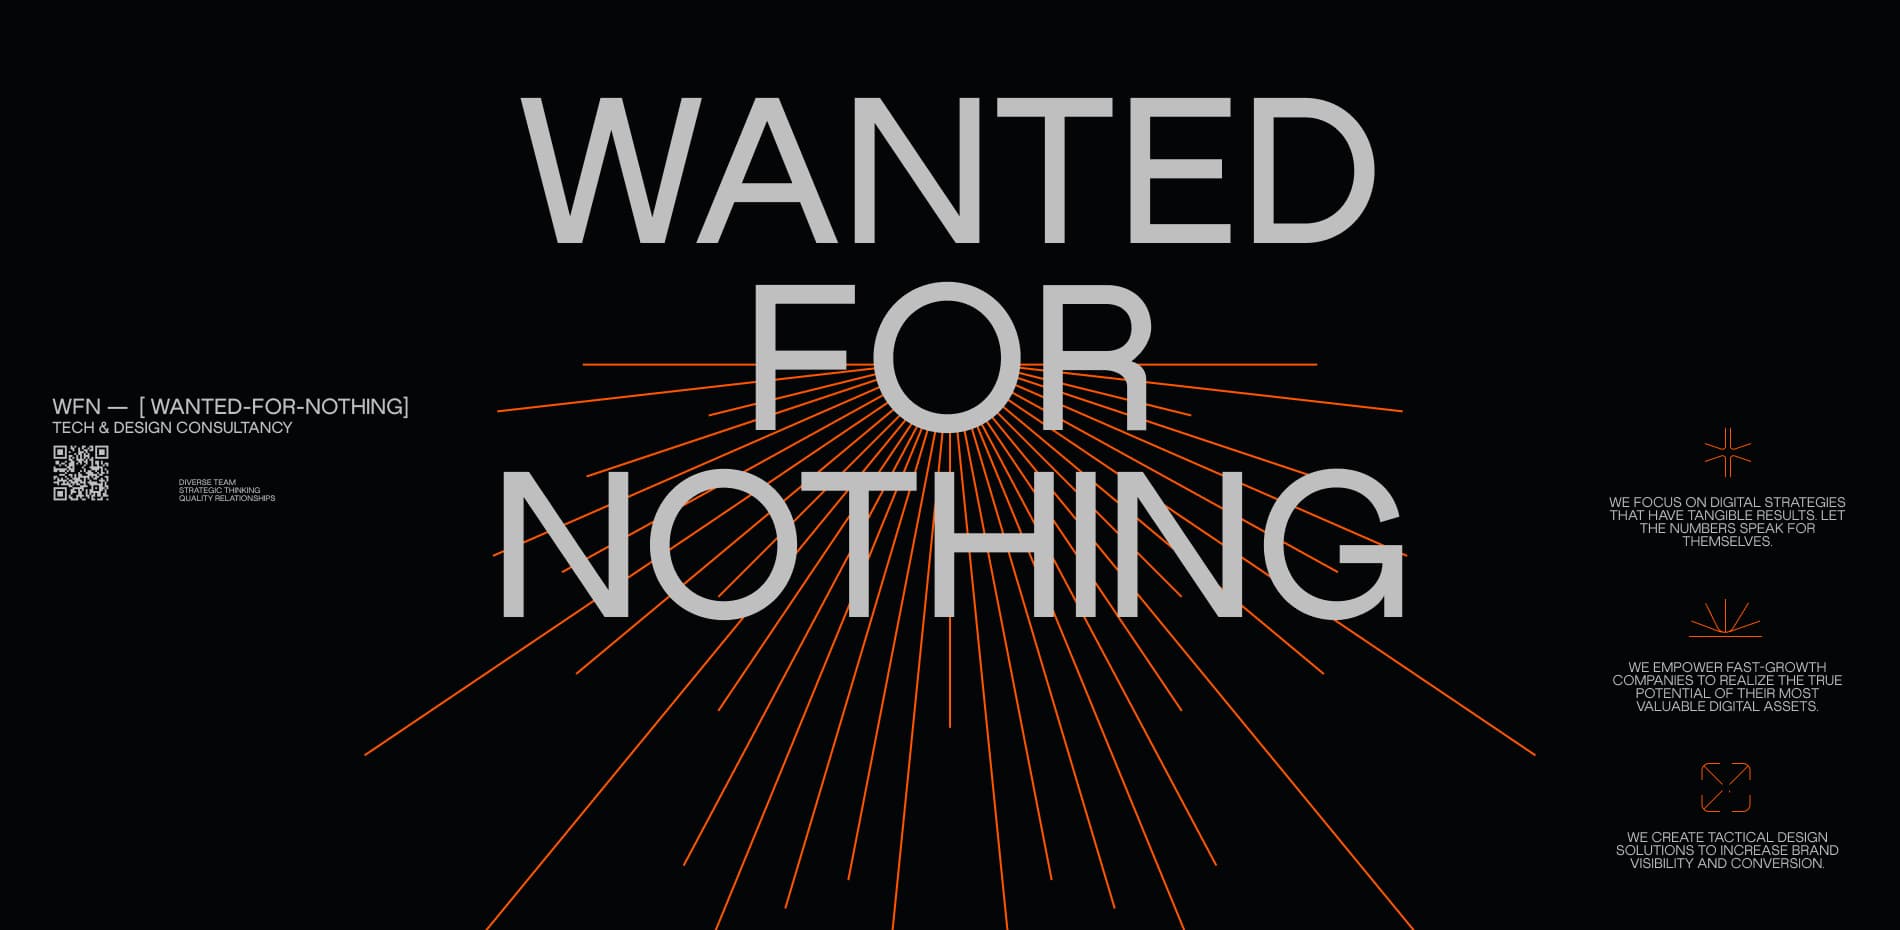 Case Study: Wanted for Nothing